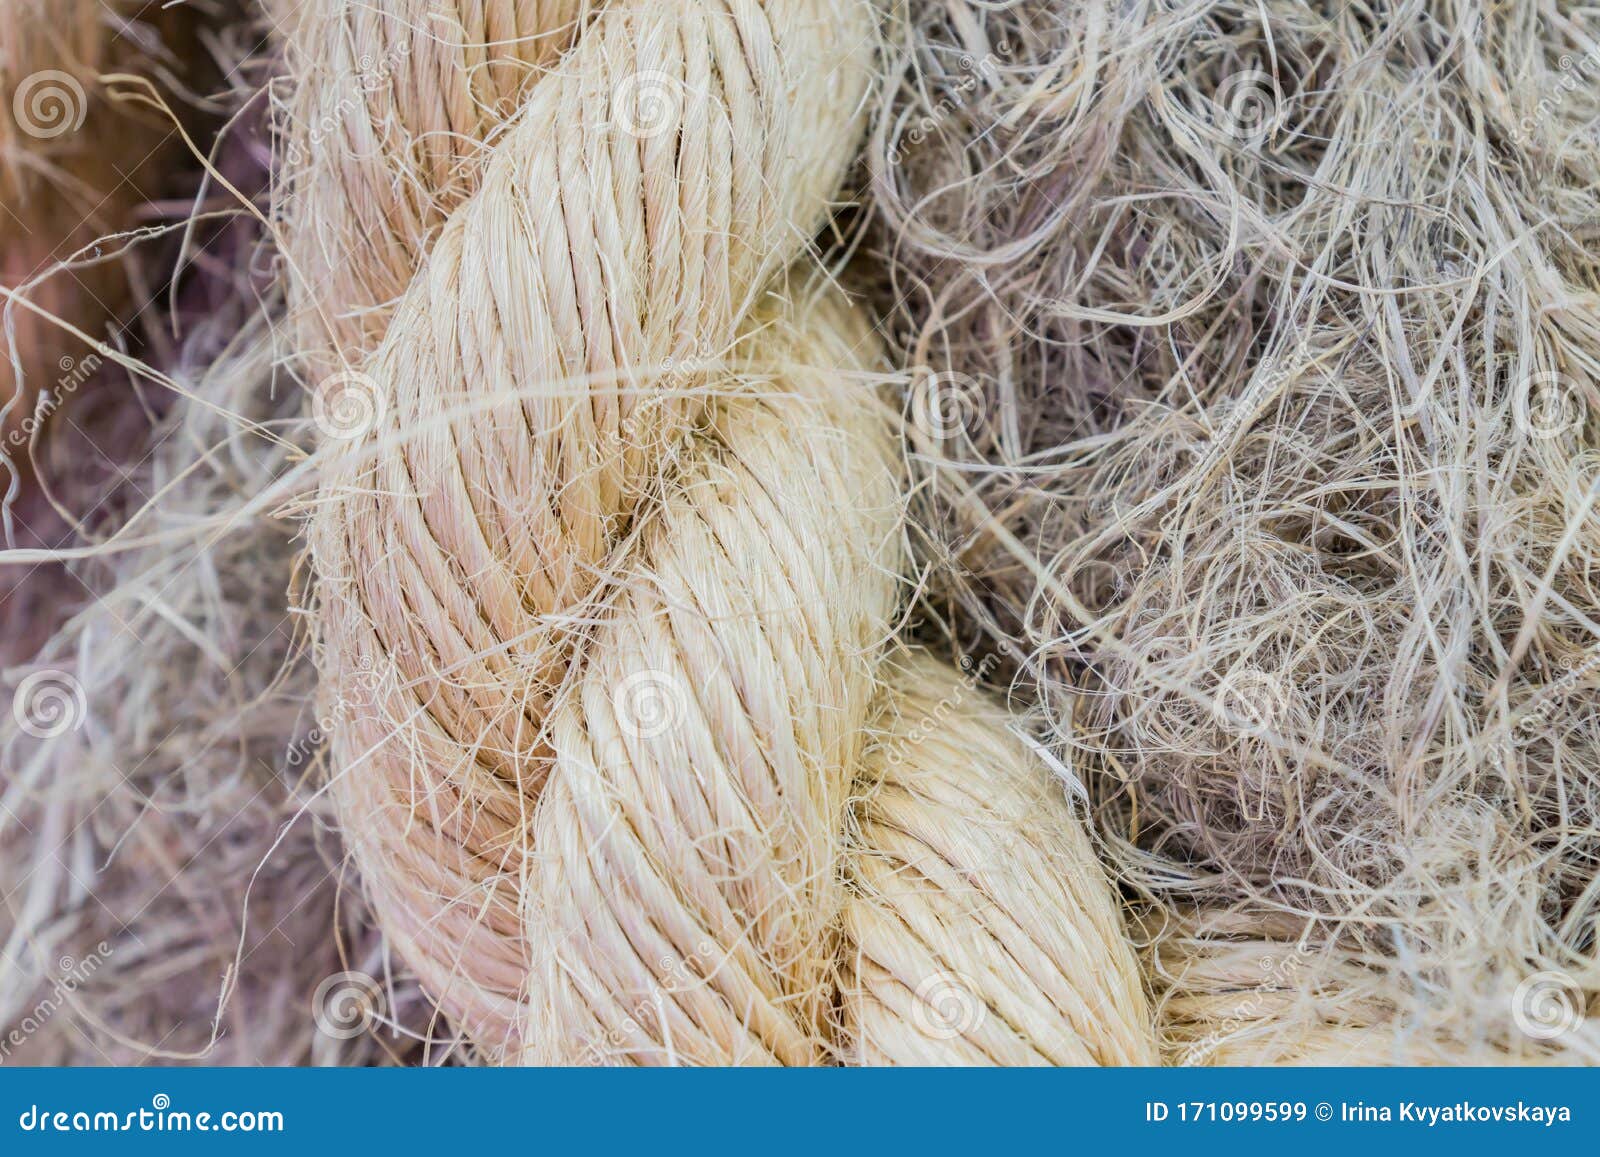 Download Close Up View Of Twisted Rope Made Of Sisal Stock Image Image Of Natural Fabric 171099599 Yellowimages Mockups